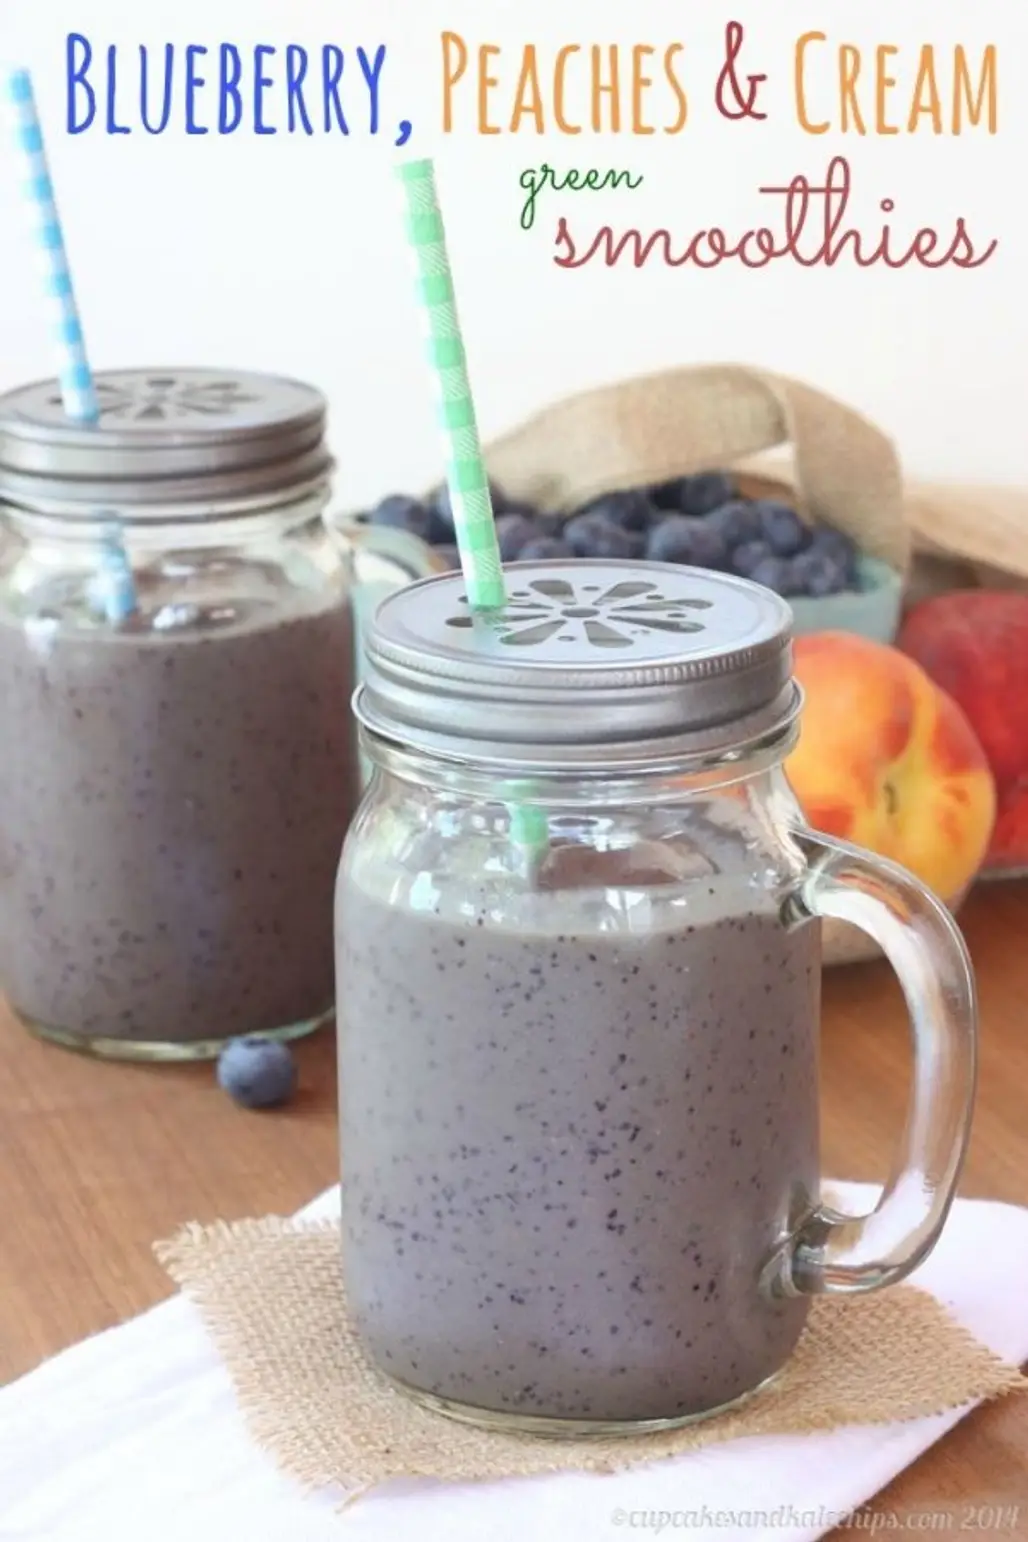 Blueberry, Peaches and Cream Green Smoothies